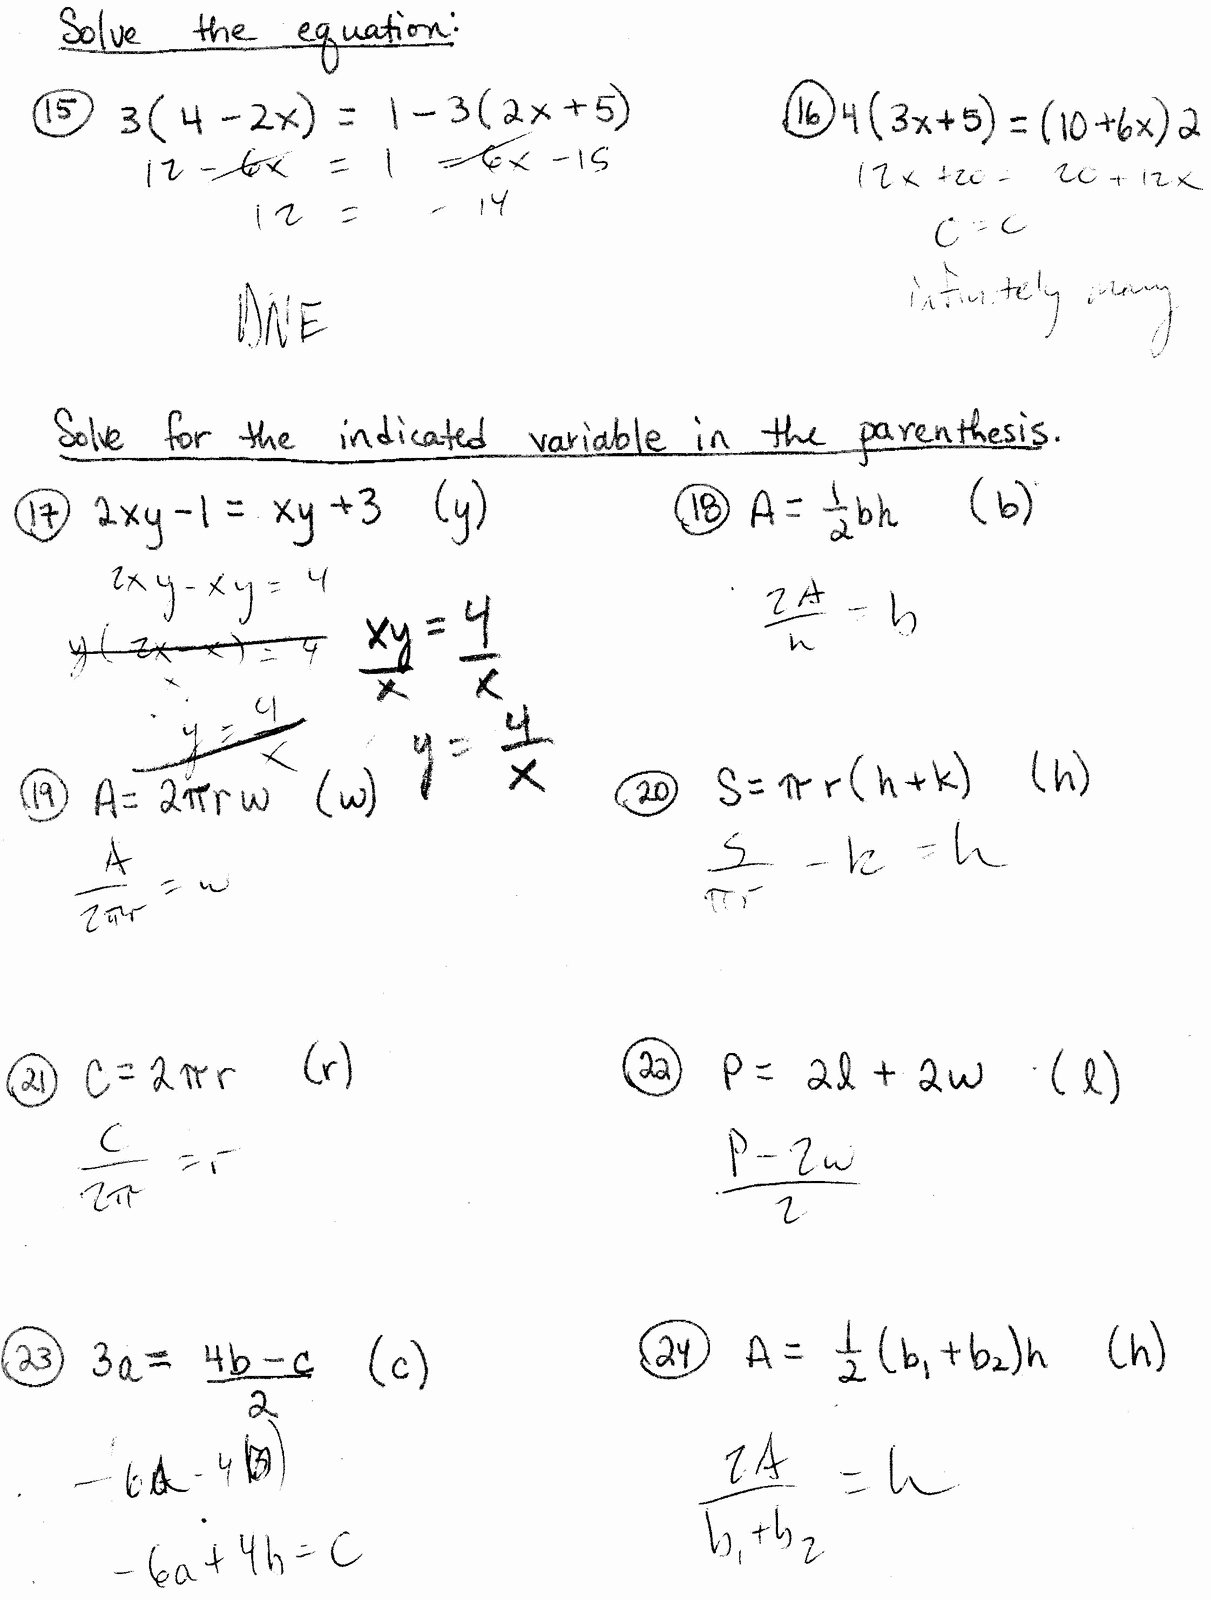 Literal Equations Worksheet Answers New Mr Suominen S Math Homepage Linear Literal Equations